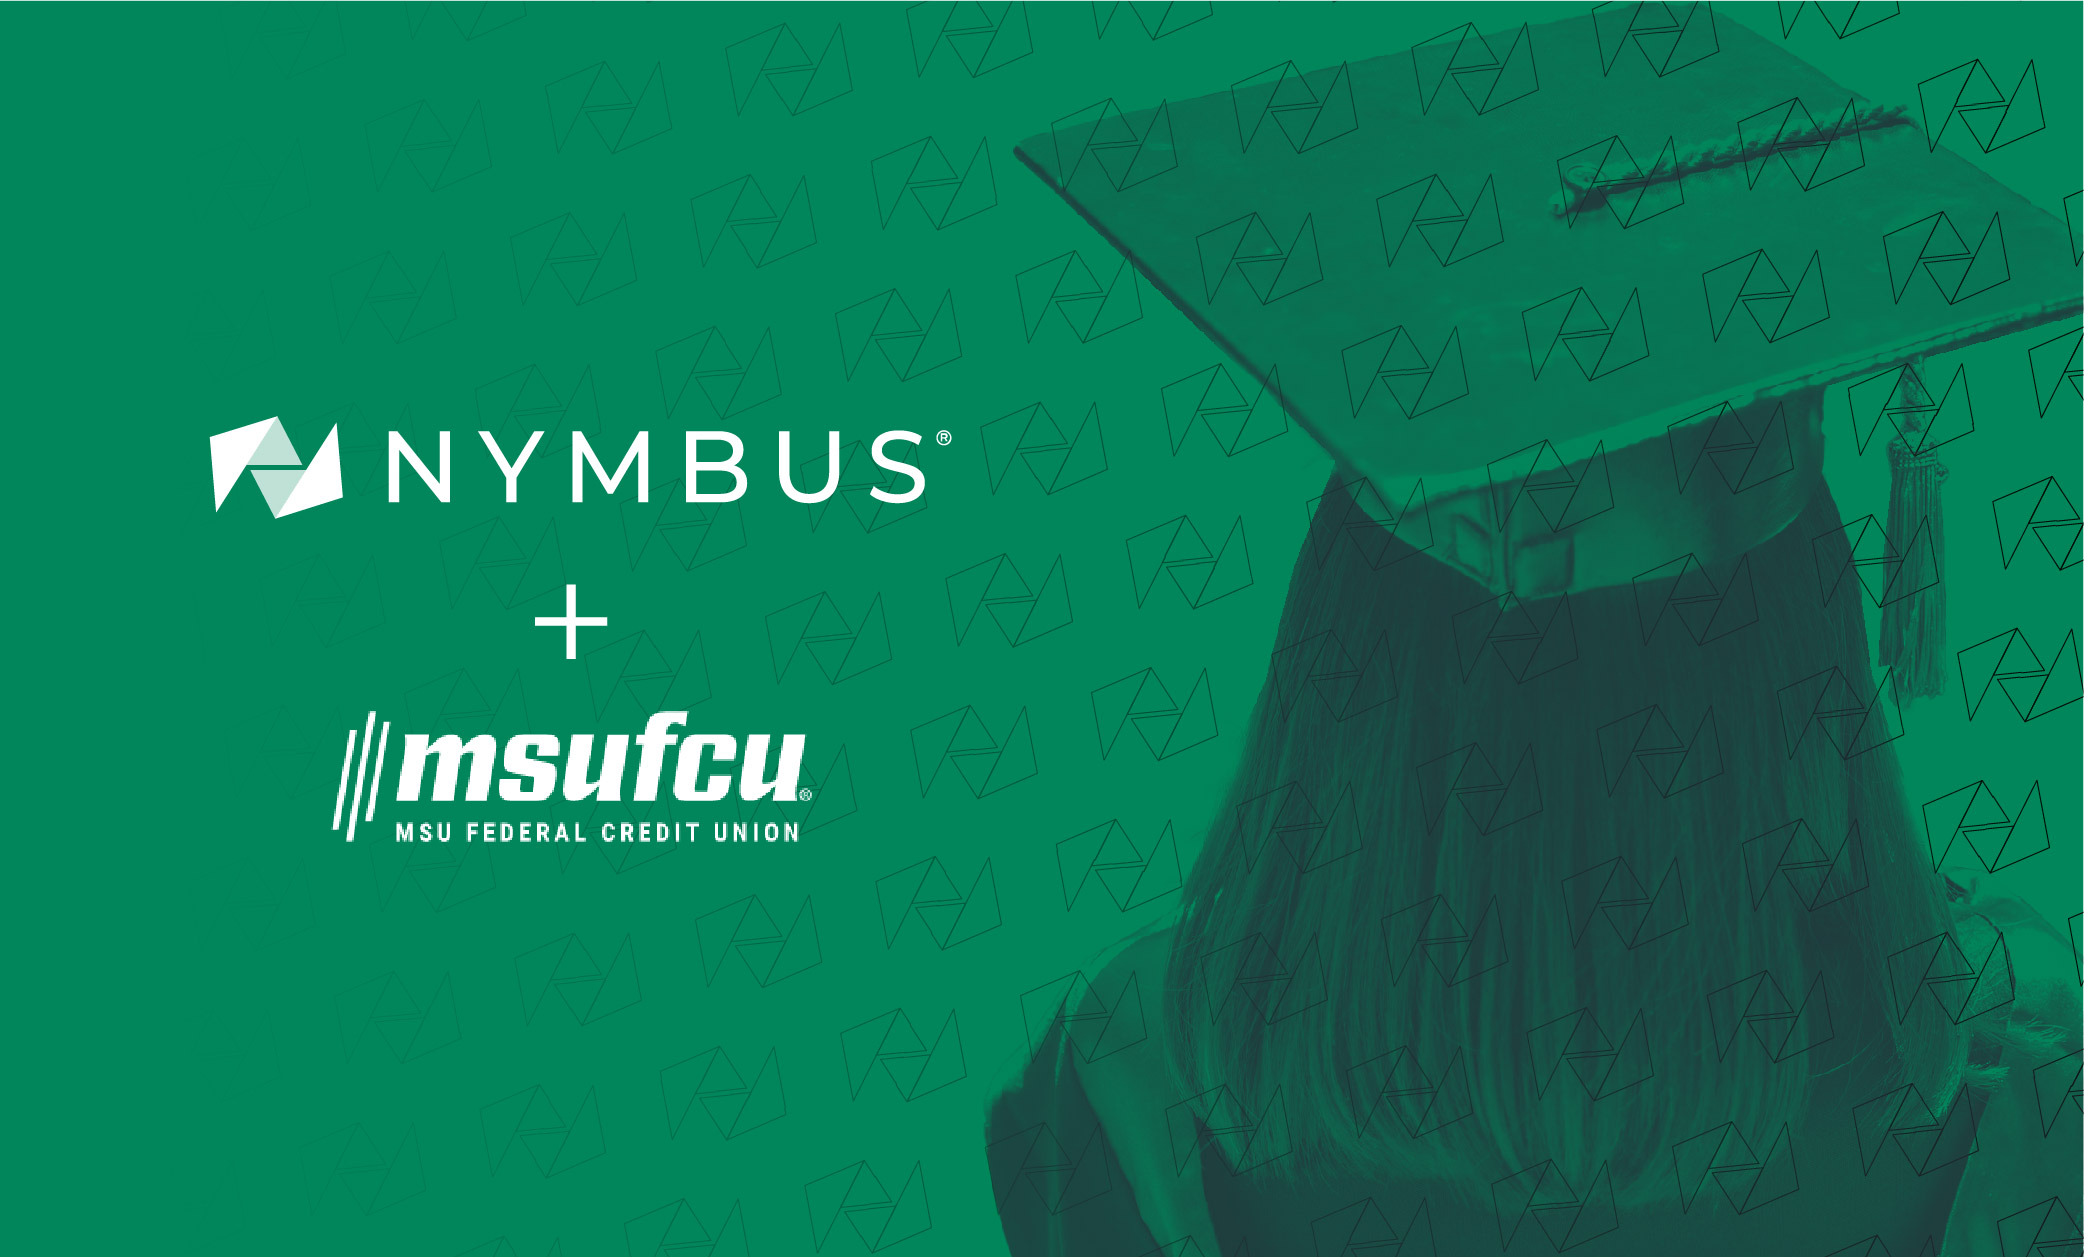 MSU Federal Credit Union Partners with Nymbus to Launch New Digital Brand Targeting University Alumni